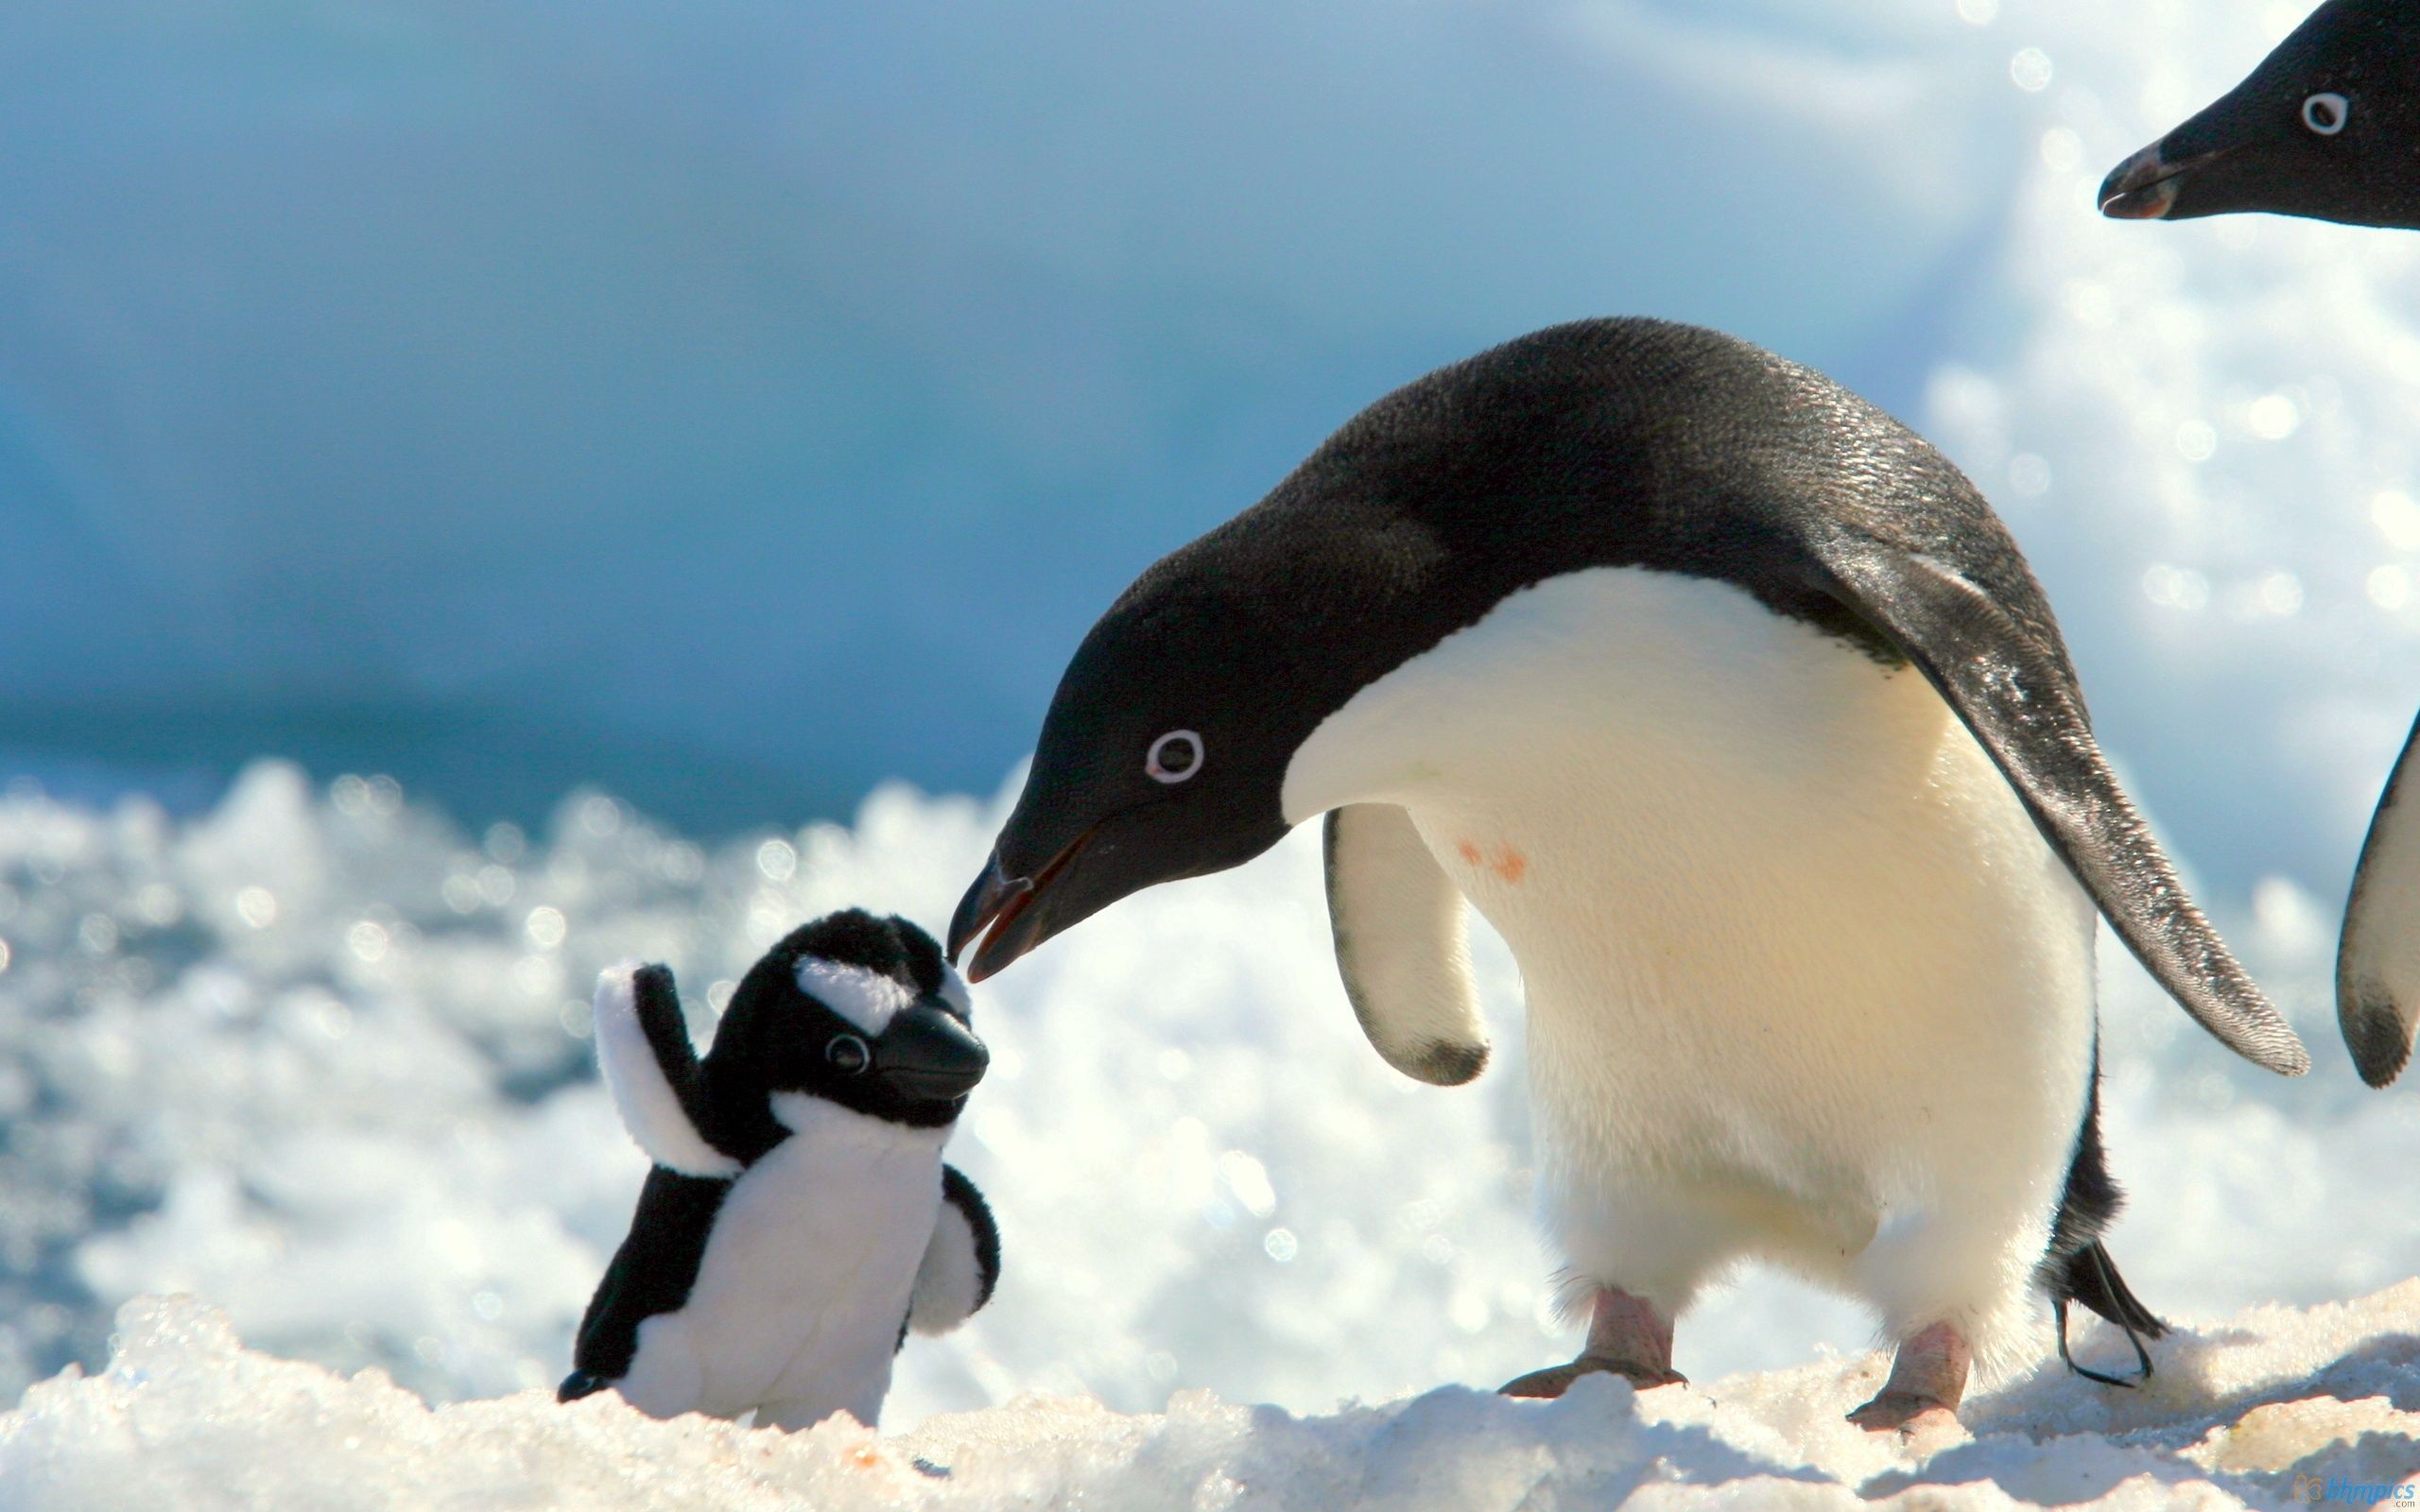 care, animals, pinguins, snow, young, joey cellphone